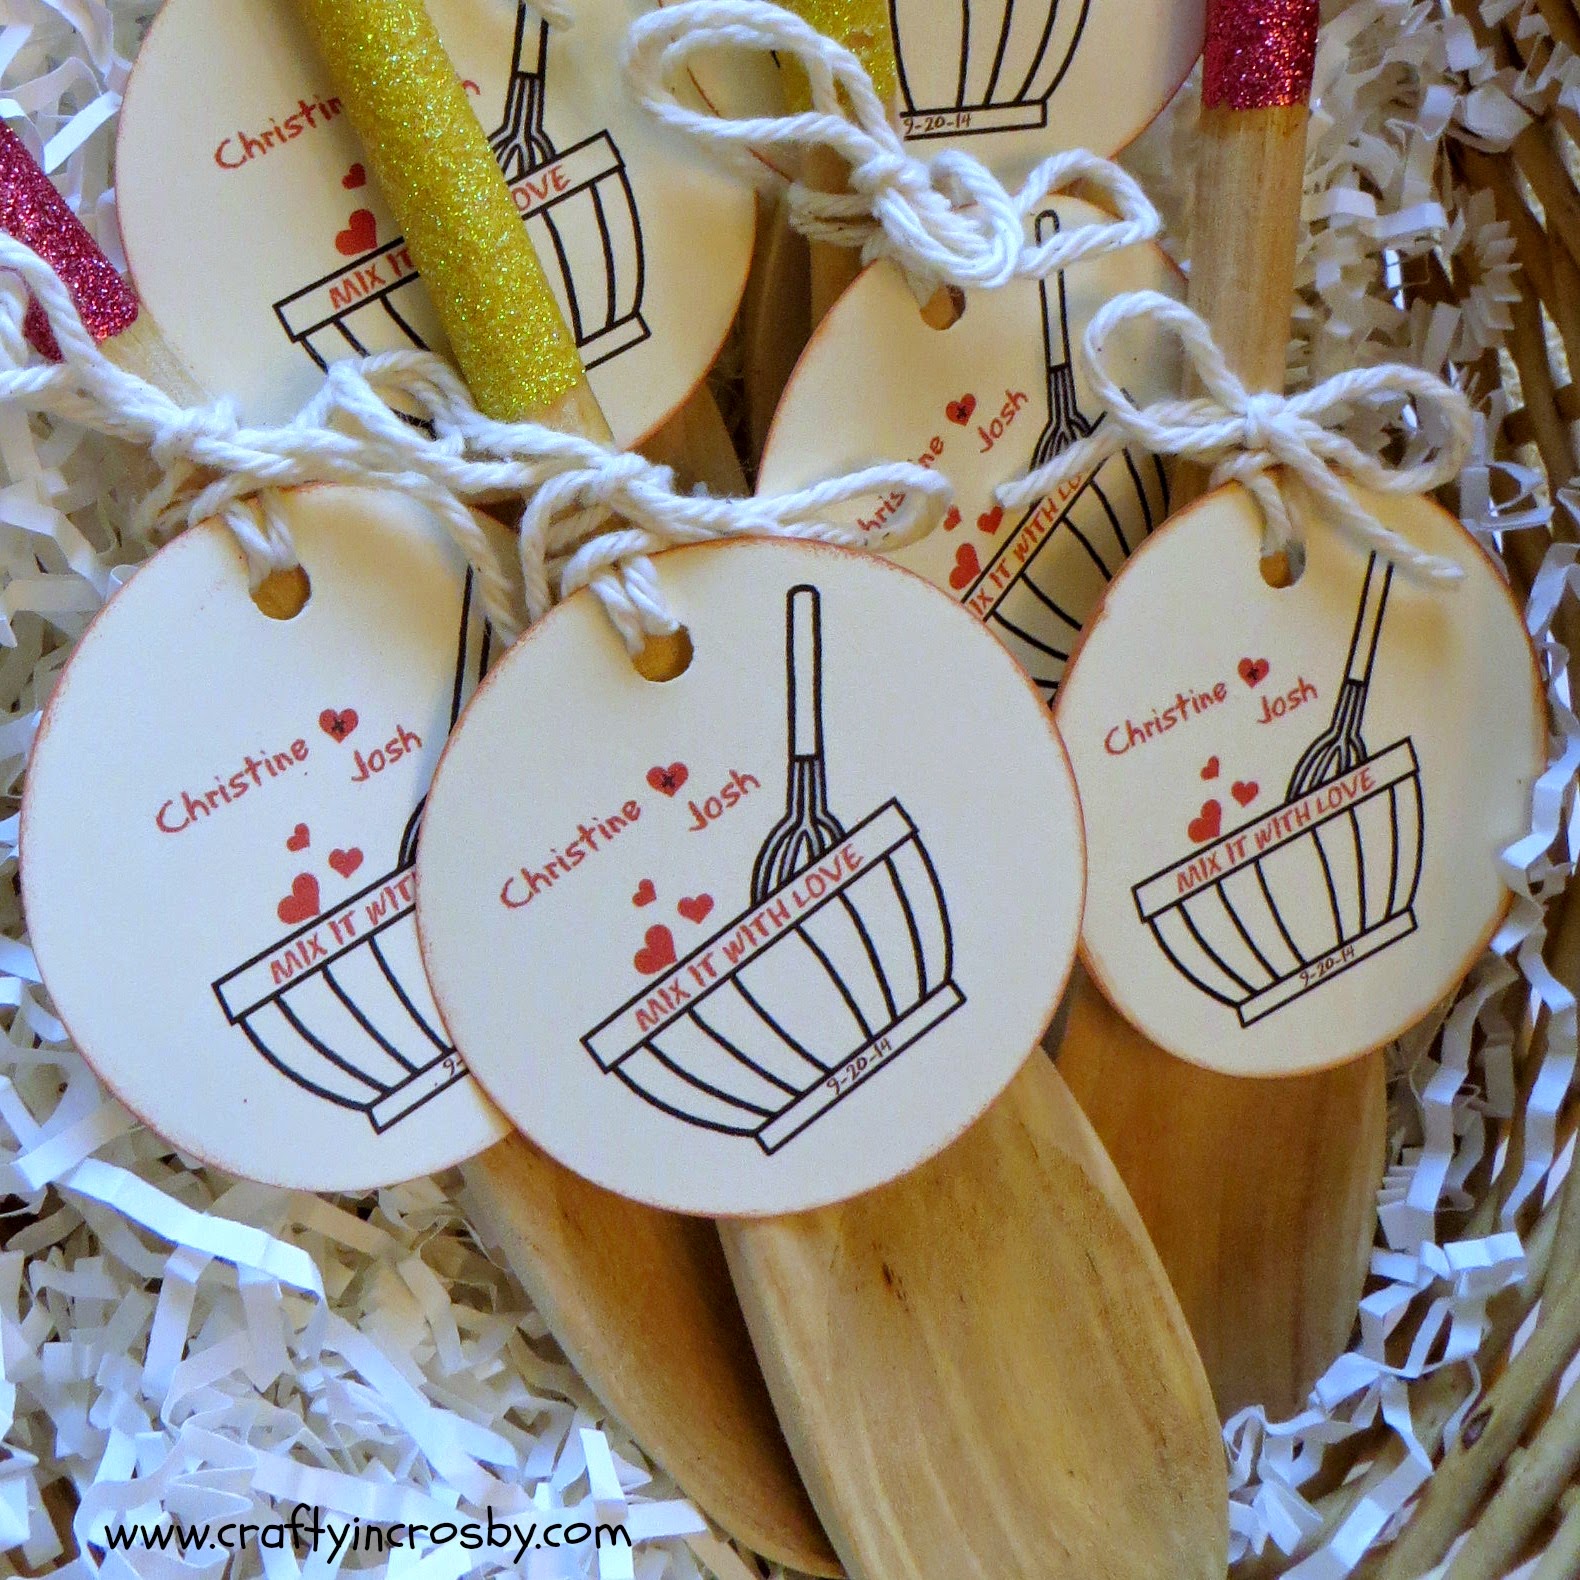 Crafty in Crosby: Bridal Shower Favors - Mix it With Love